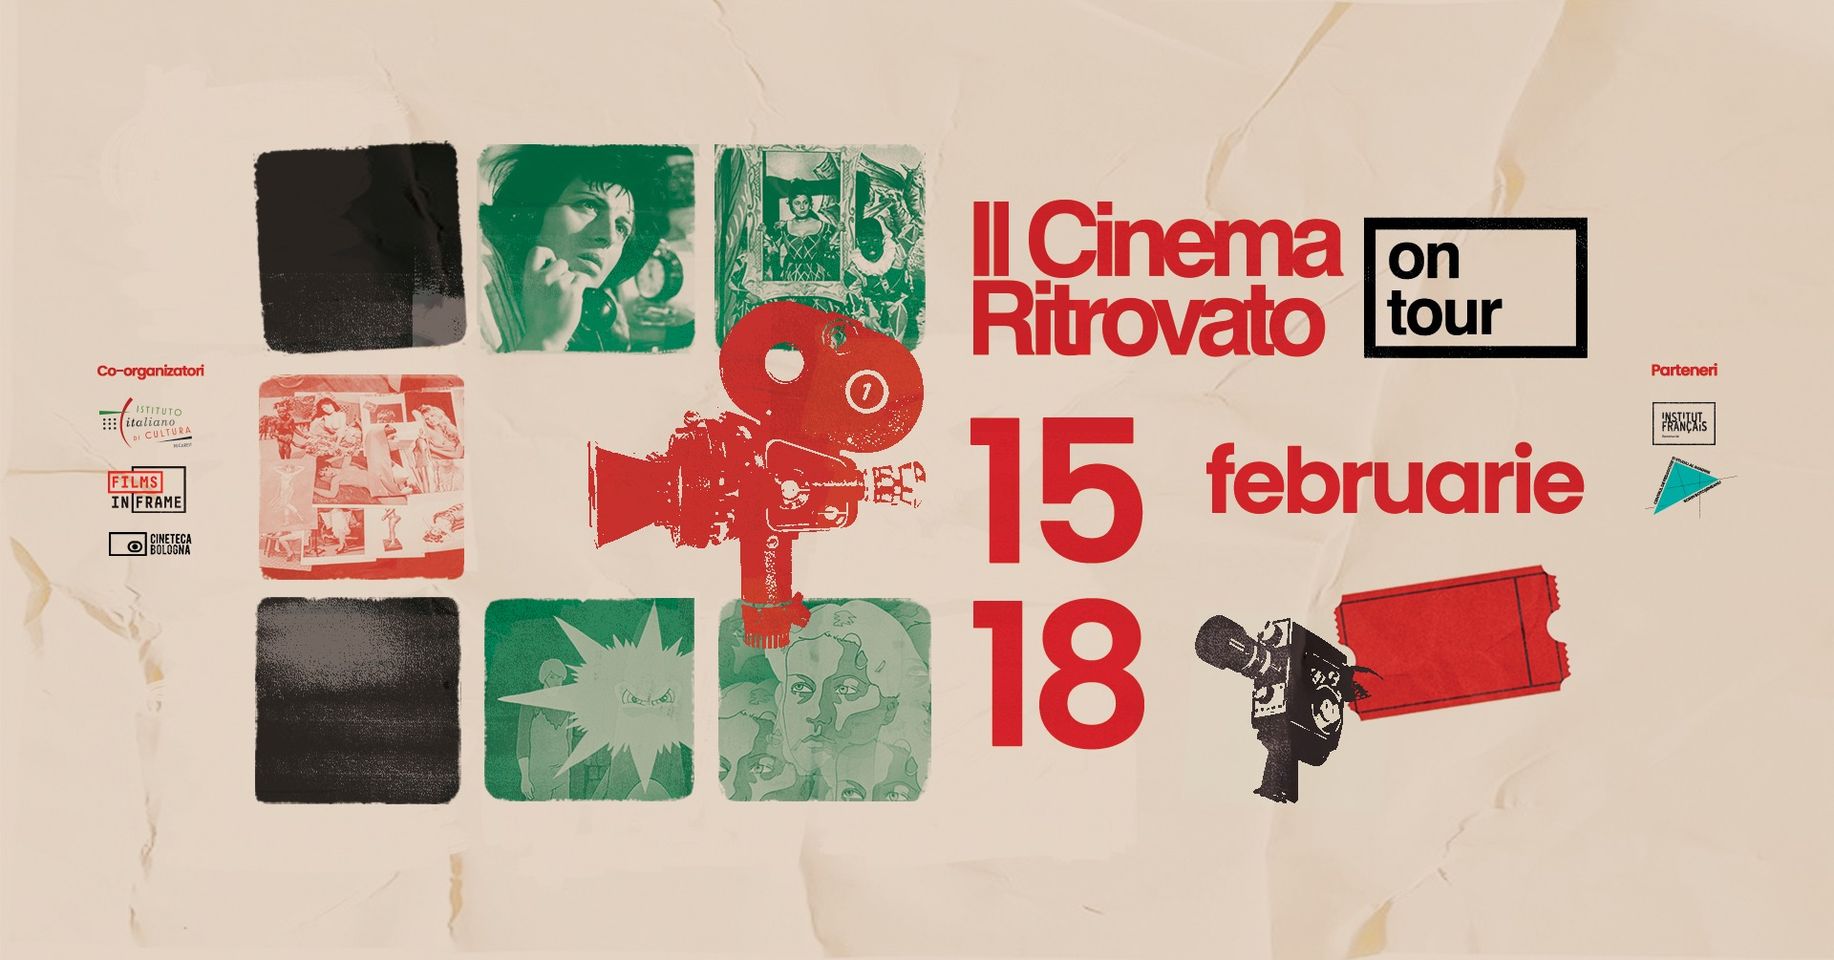 Romanian film review – Il Cinema Ritrovato on Tour, KineDok, and a week of love in Timișoara